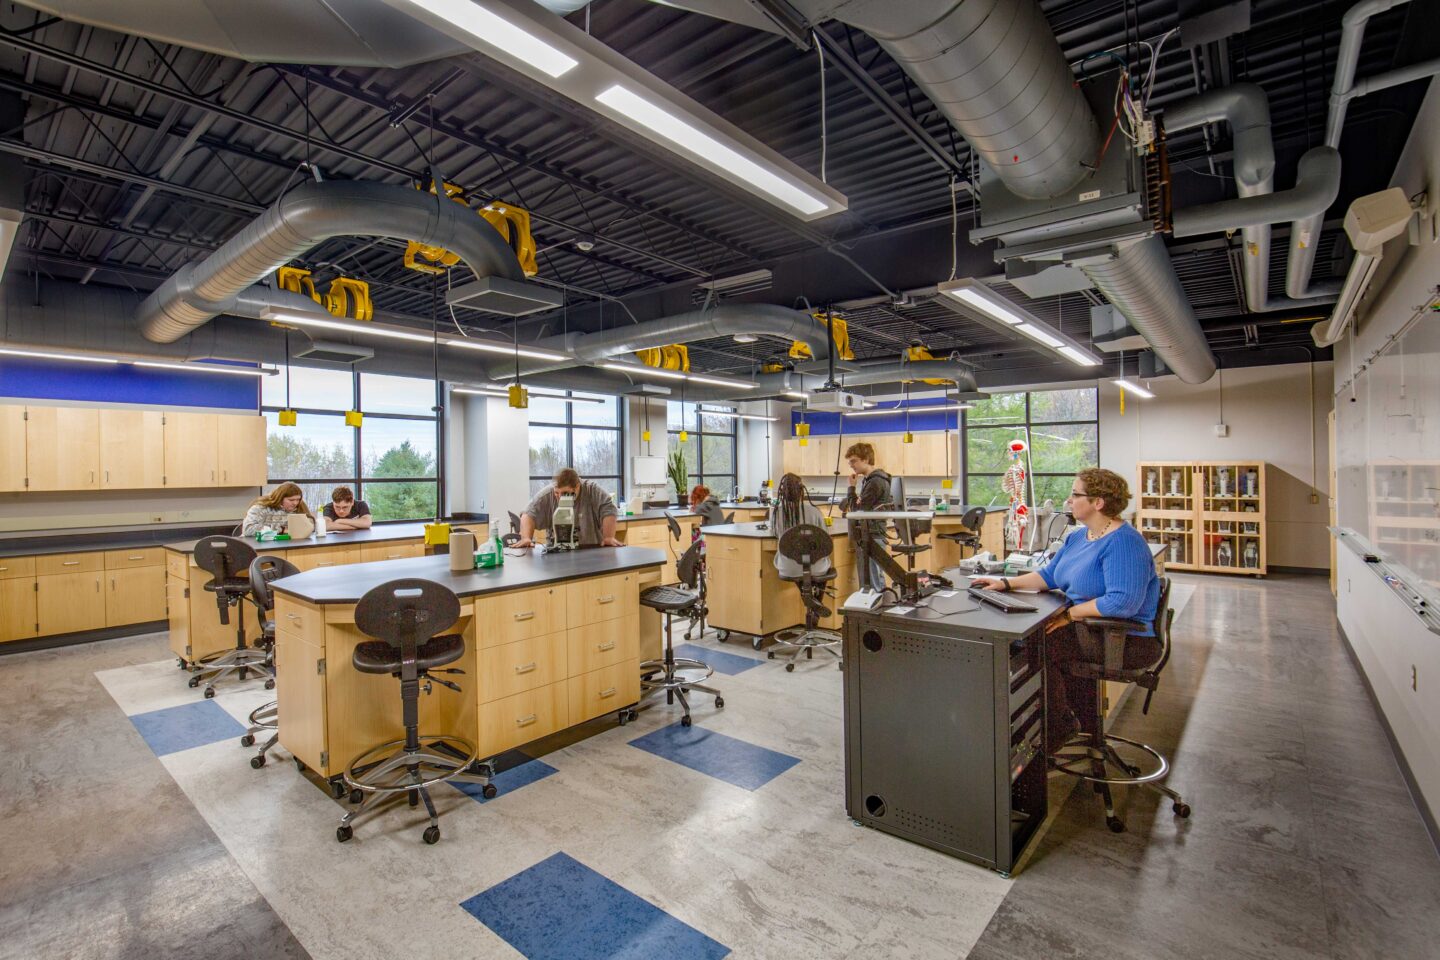 Students work at tables in a biology lab with an industrial ceiling and large windows